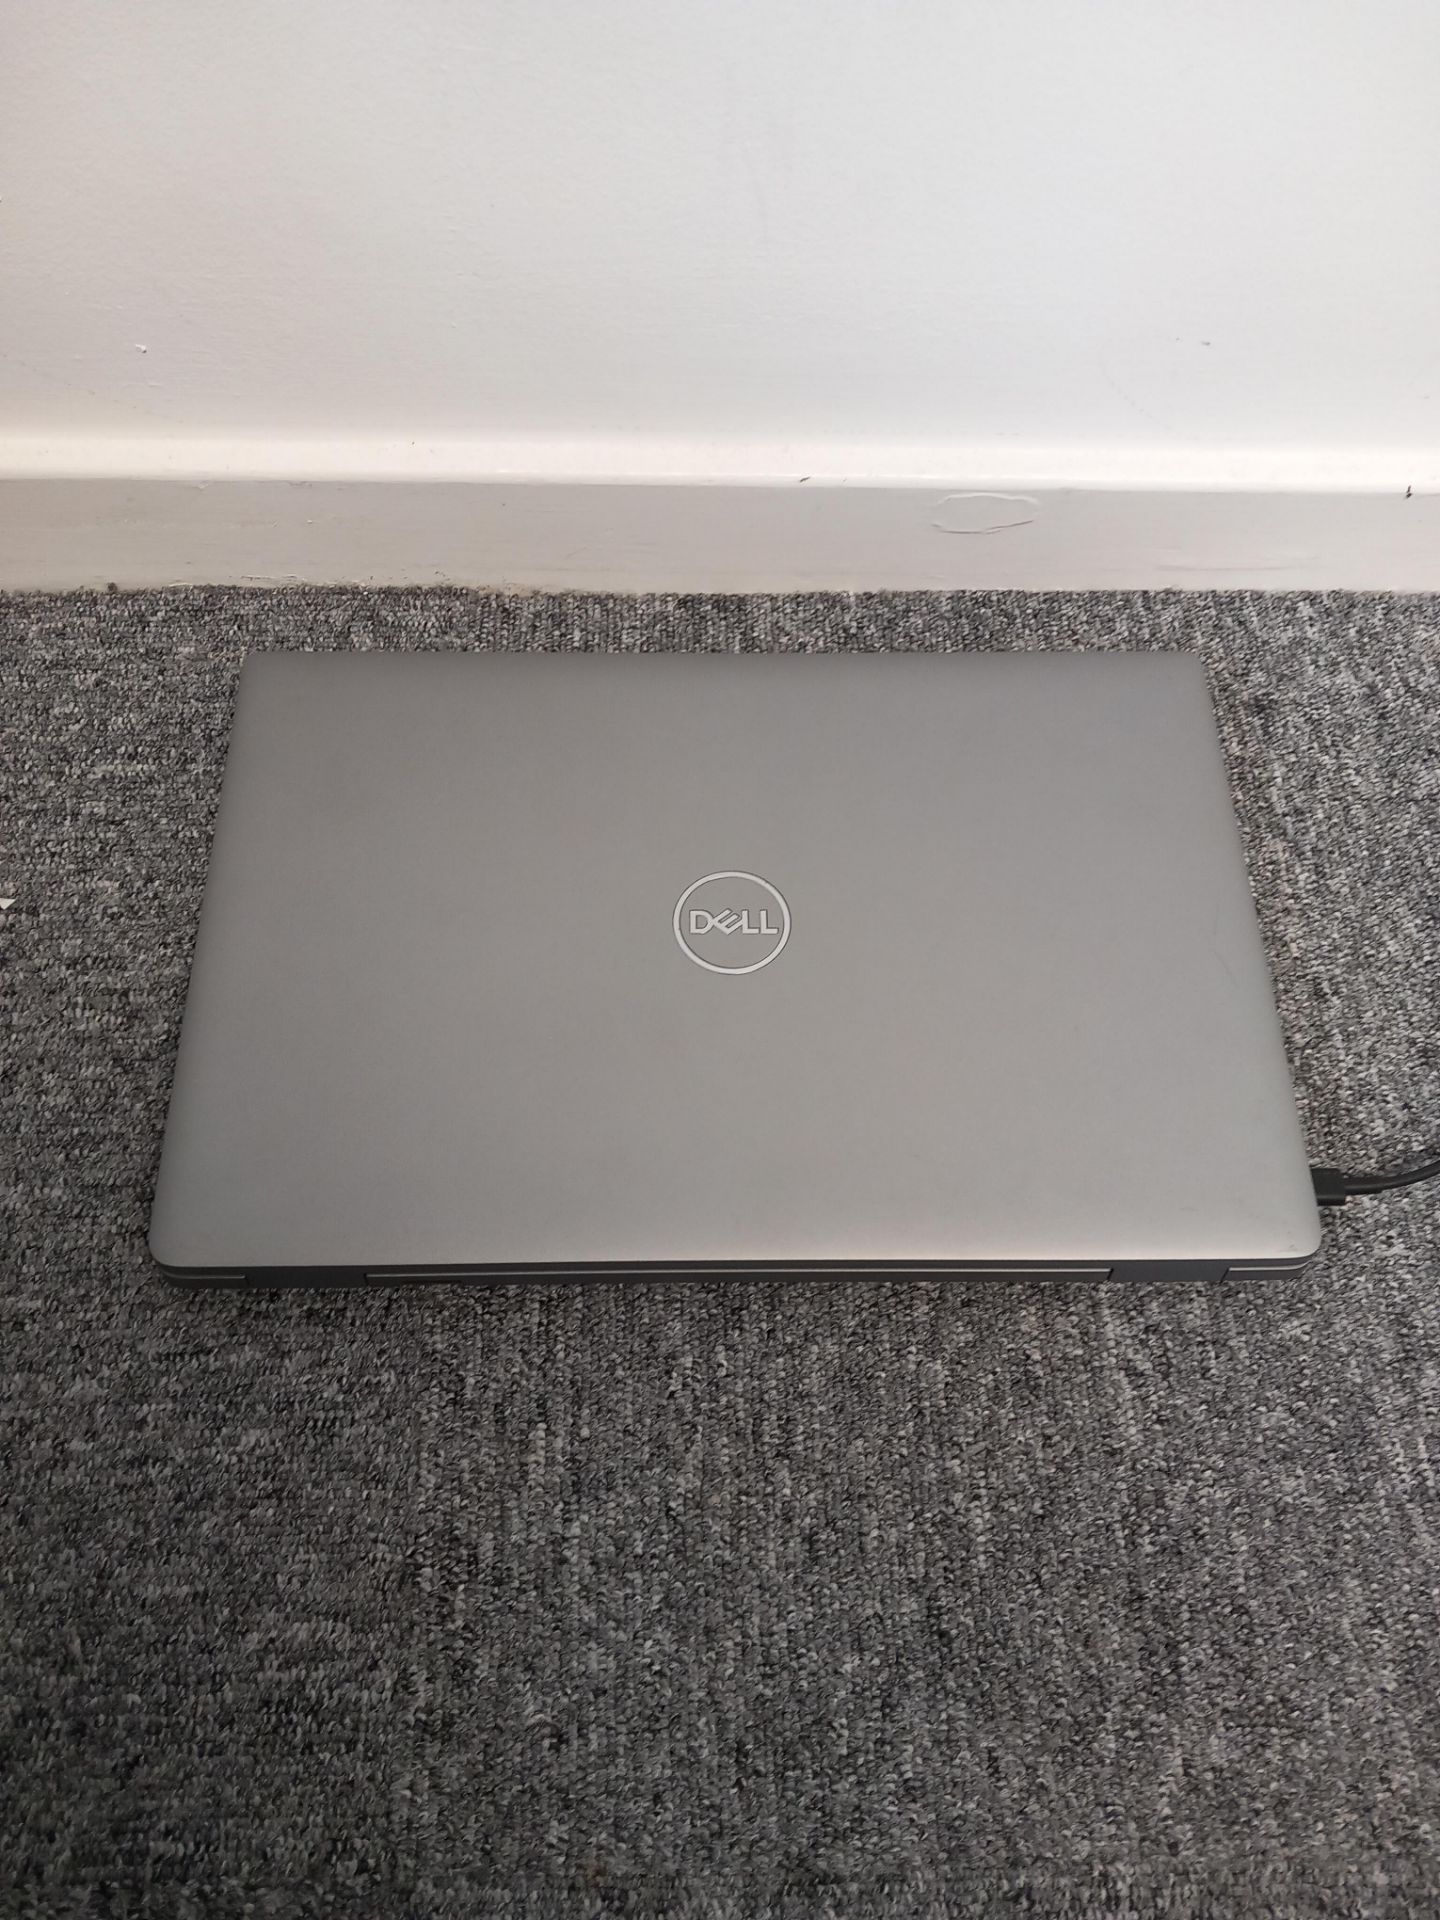 Dell Latitude 5520 Laptop no Charger (Located in Stockport)